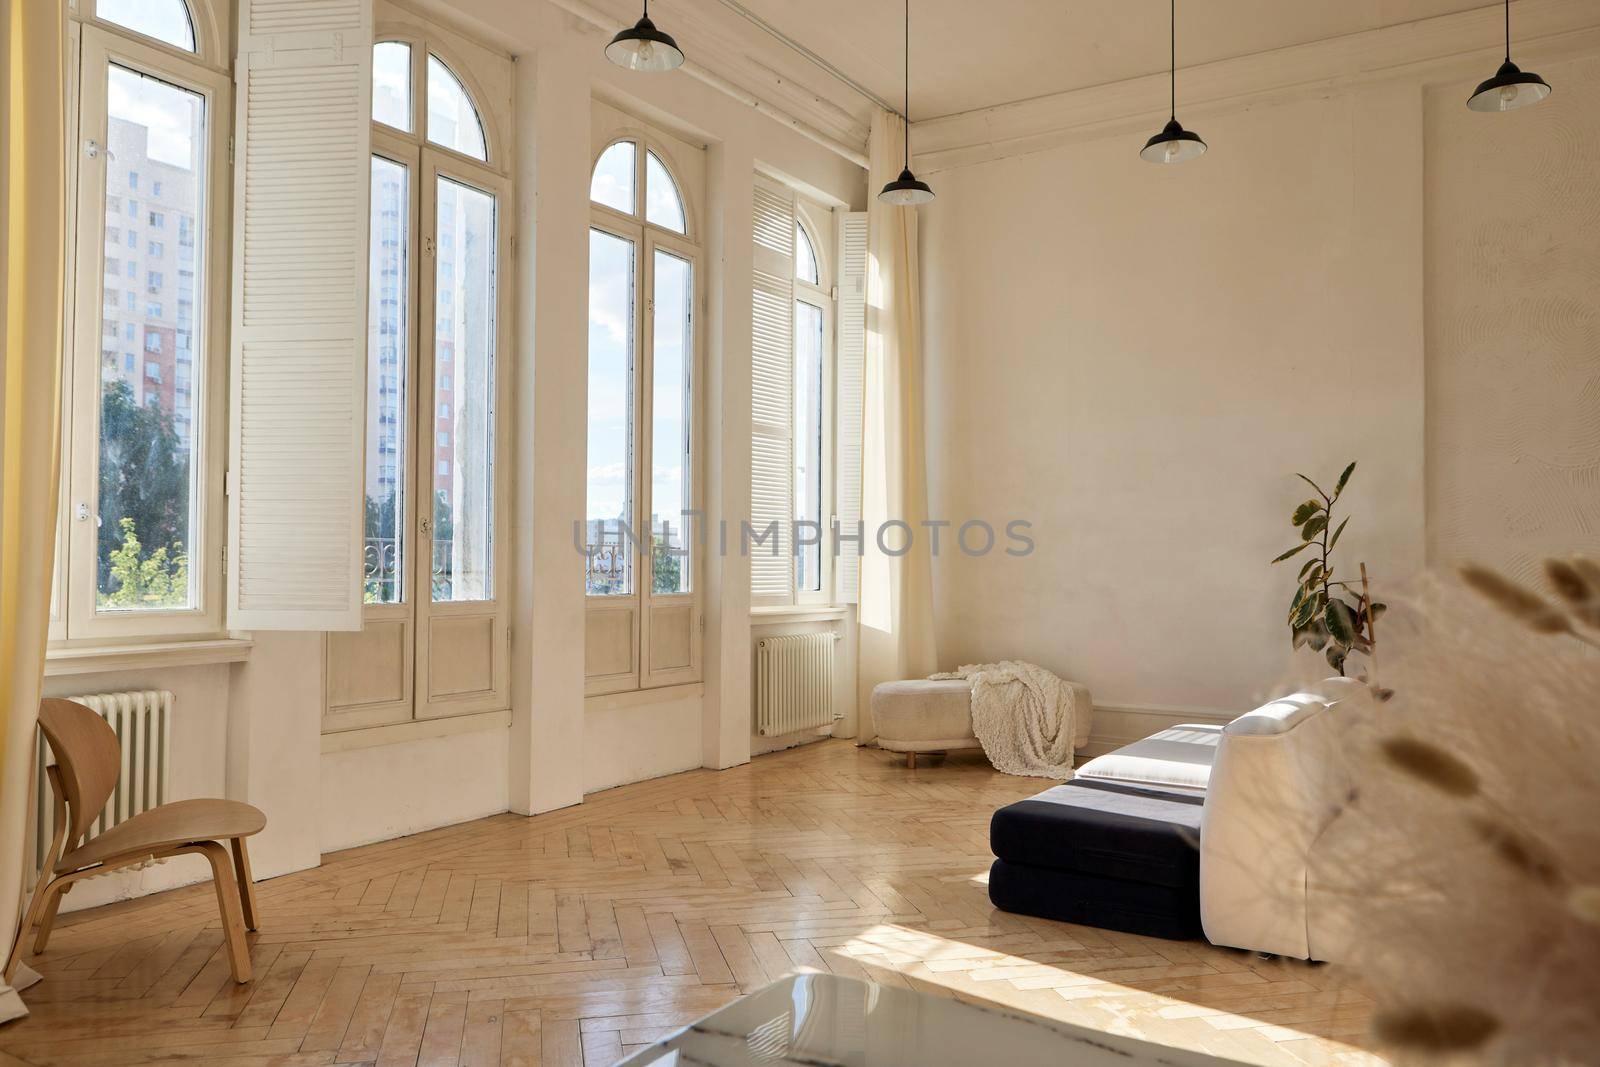 Comfortable modern sofa located in front of large windows inside spacious sunlit living room